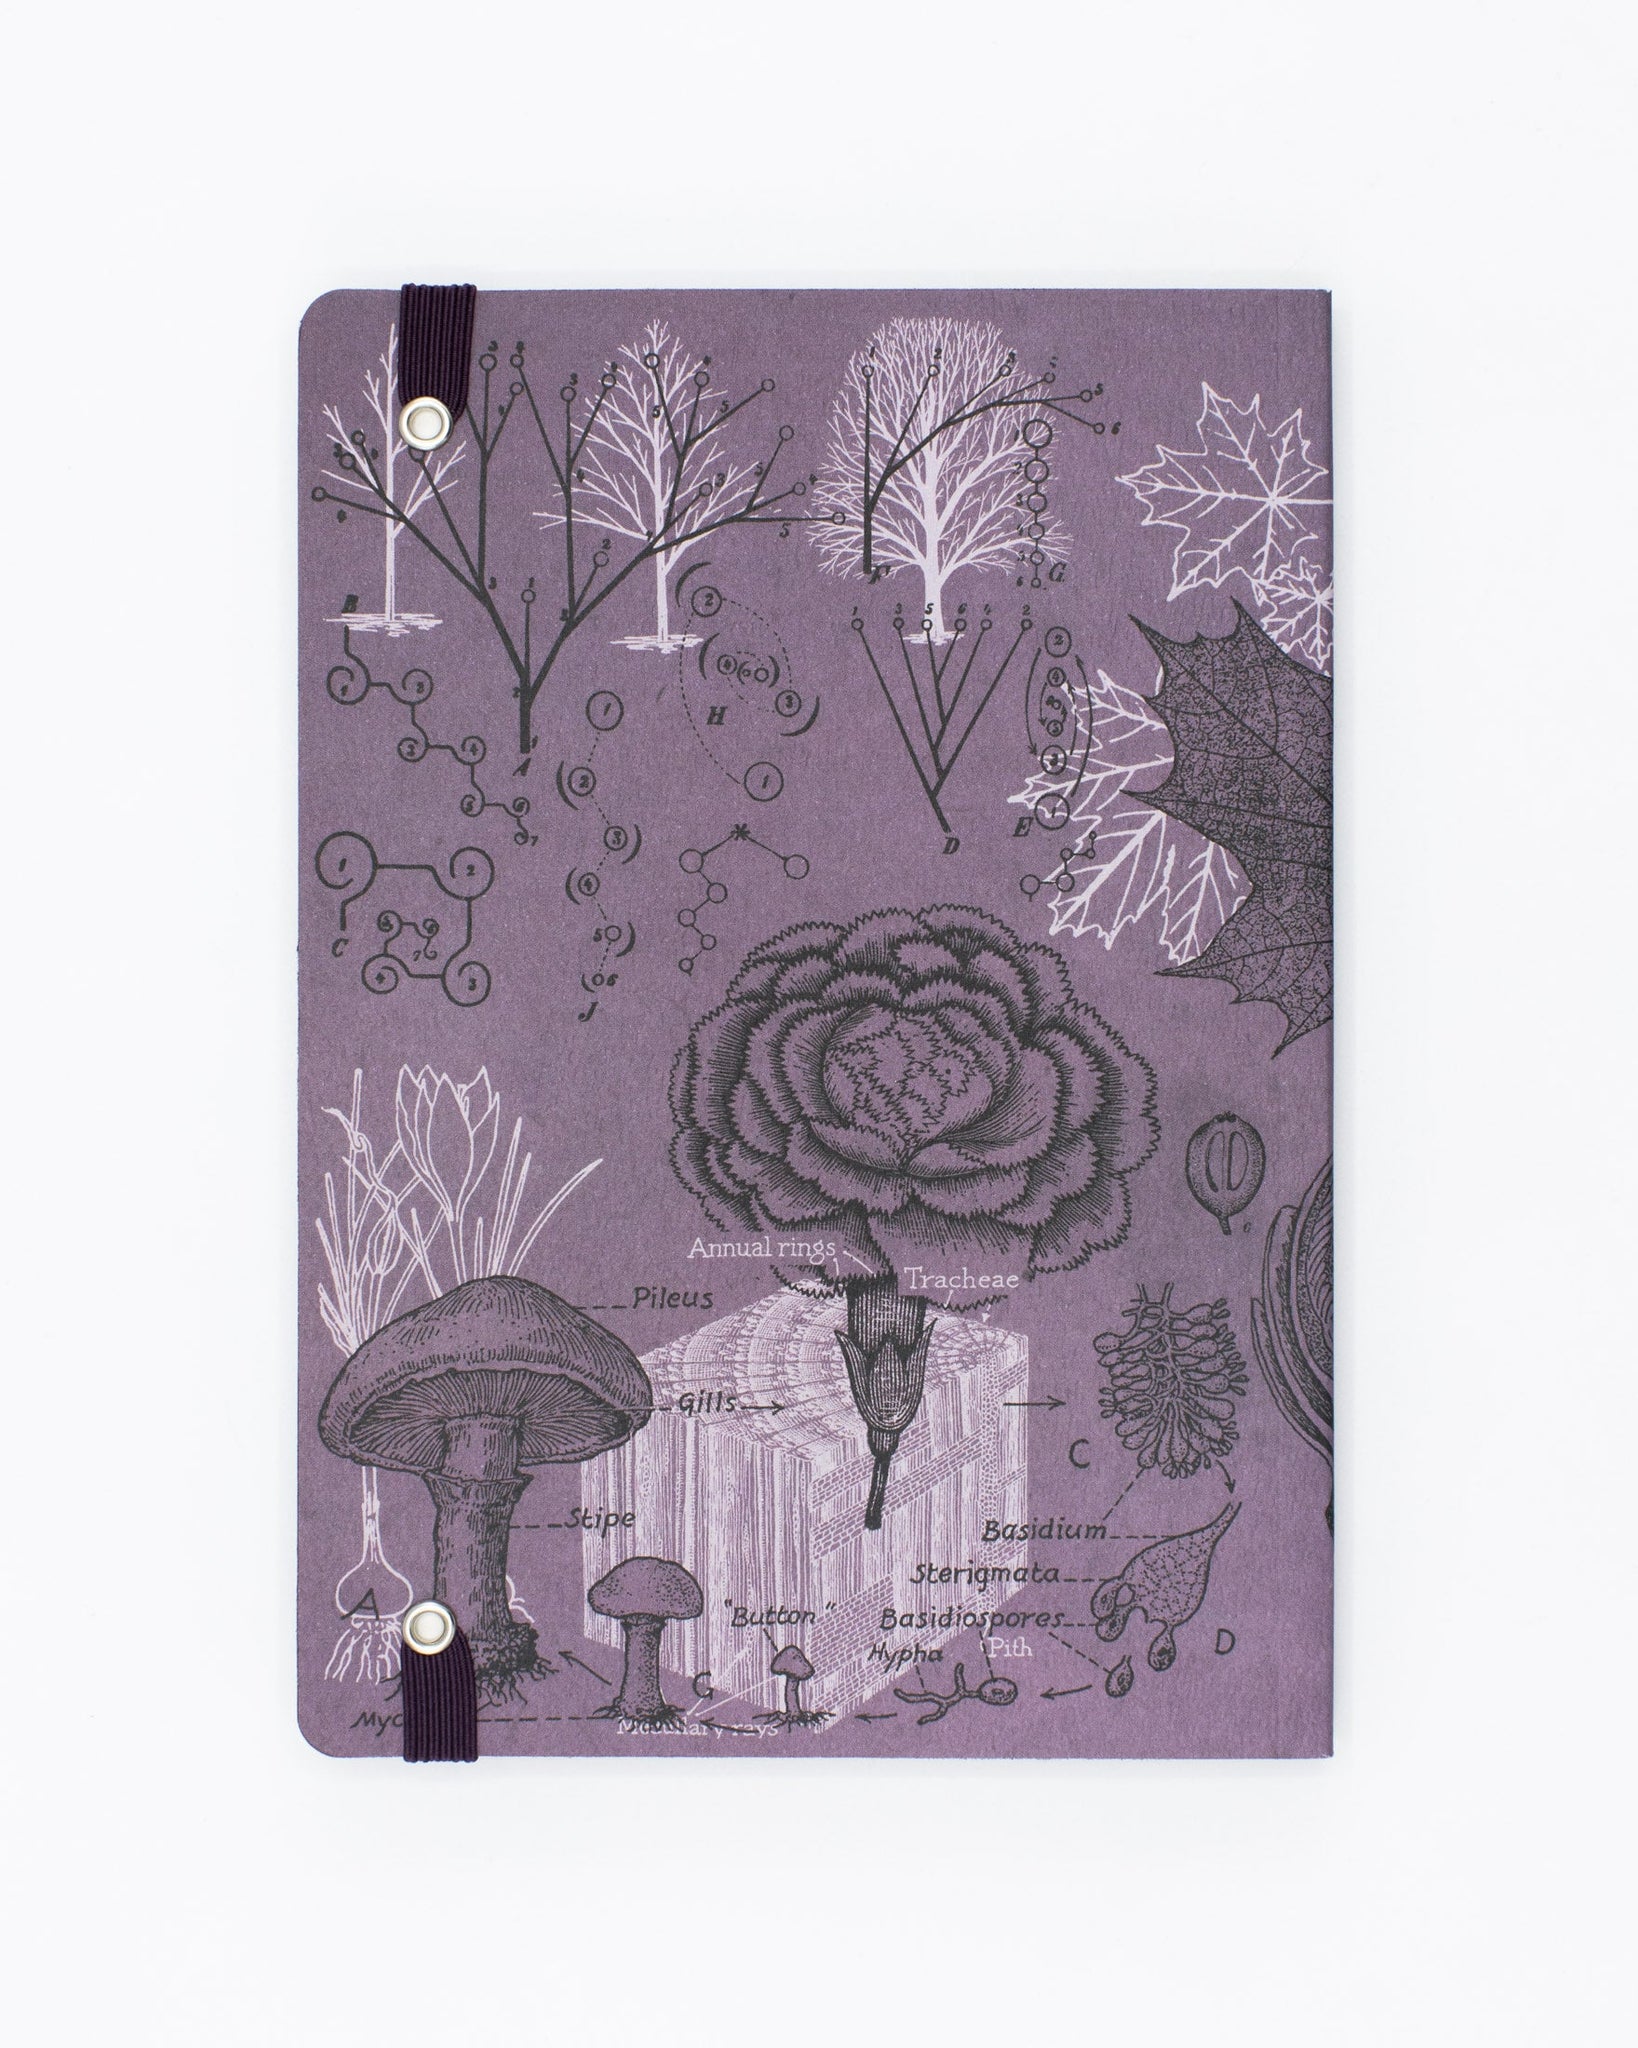 Forest at Dusk A5 Softcover